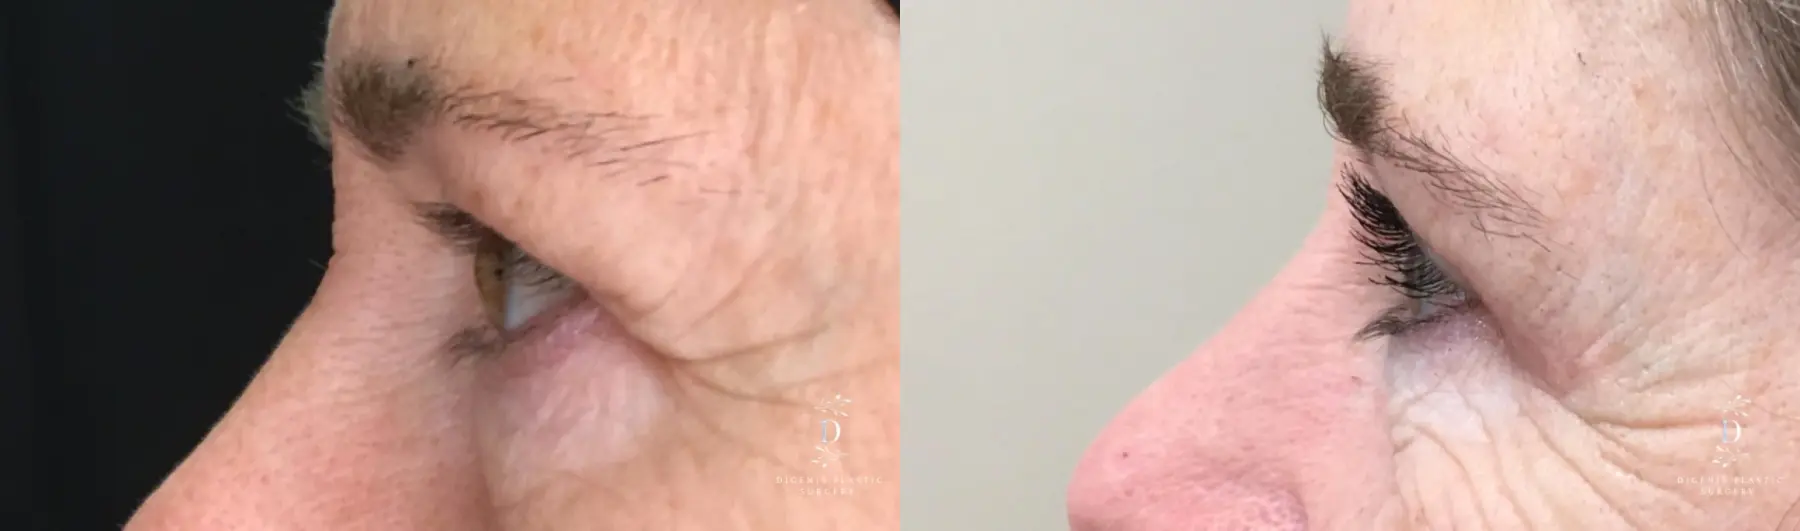 Eyelid Surgery: Patient 32 - Before and After 5